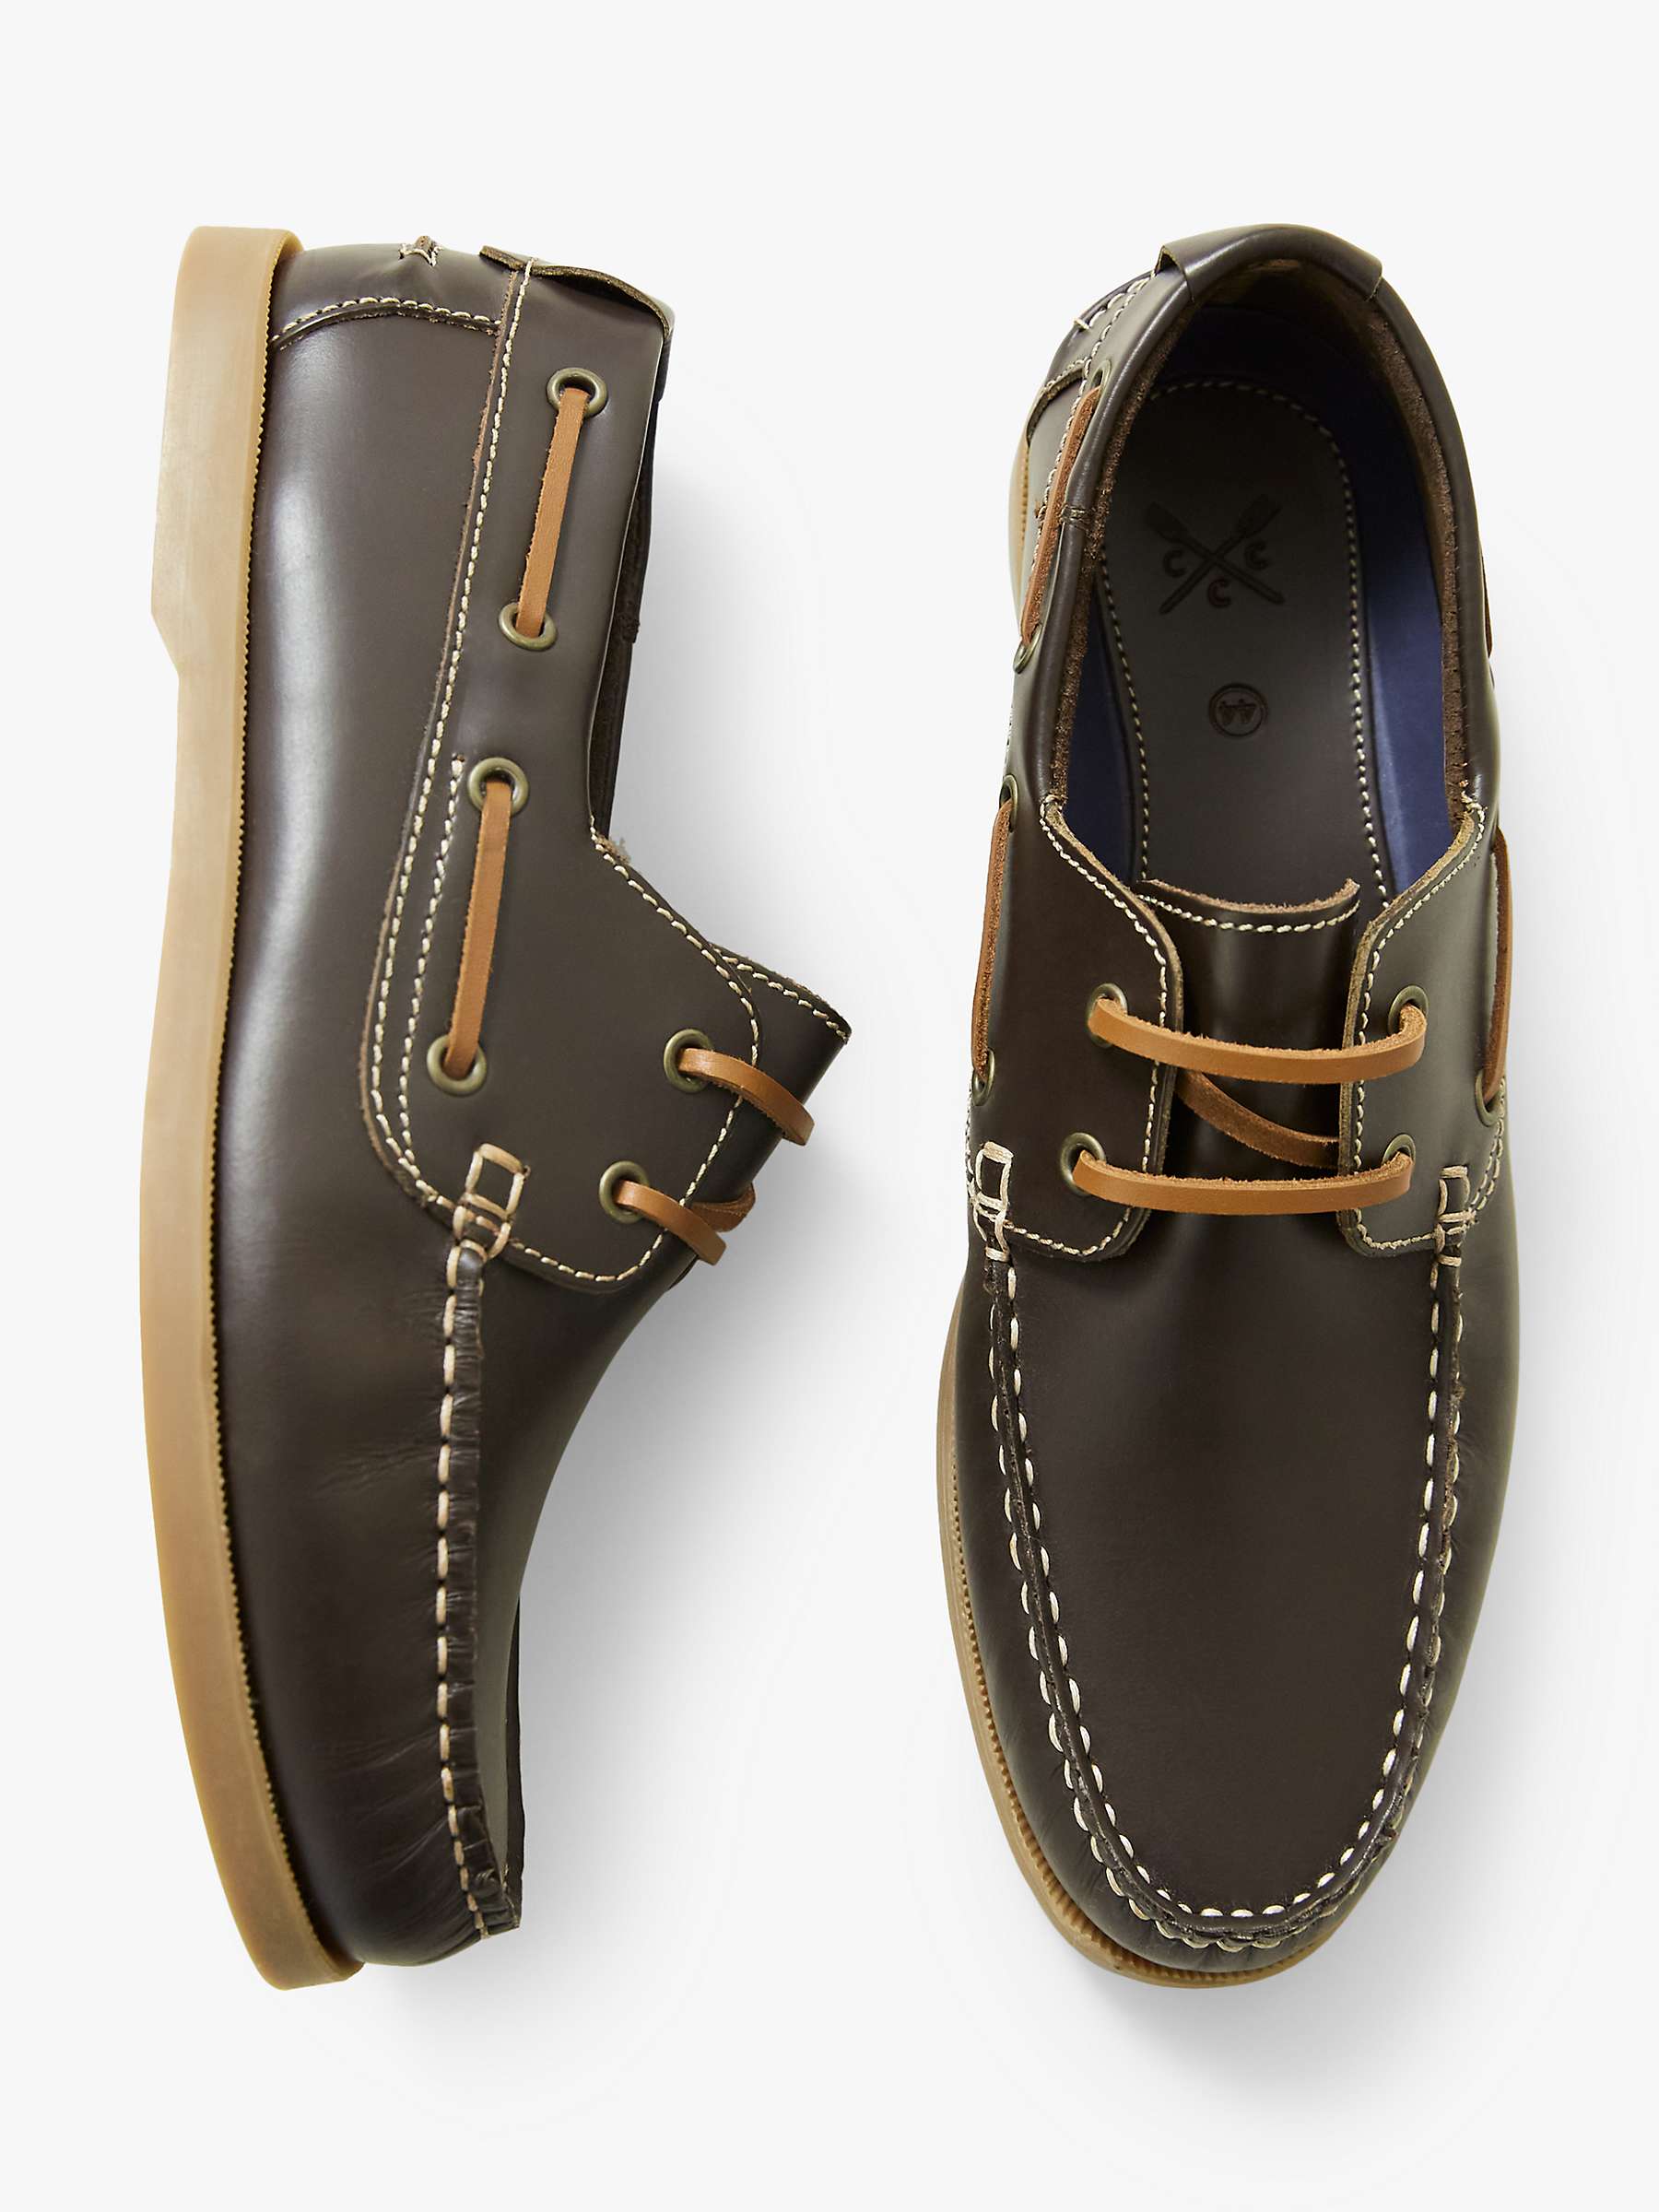 Buy Crew Clothing Austell Leather Boat Shoes, Chocolate Brown Online at johnlewis.com